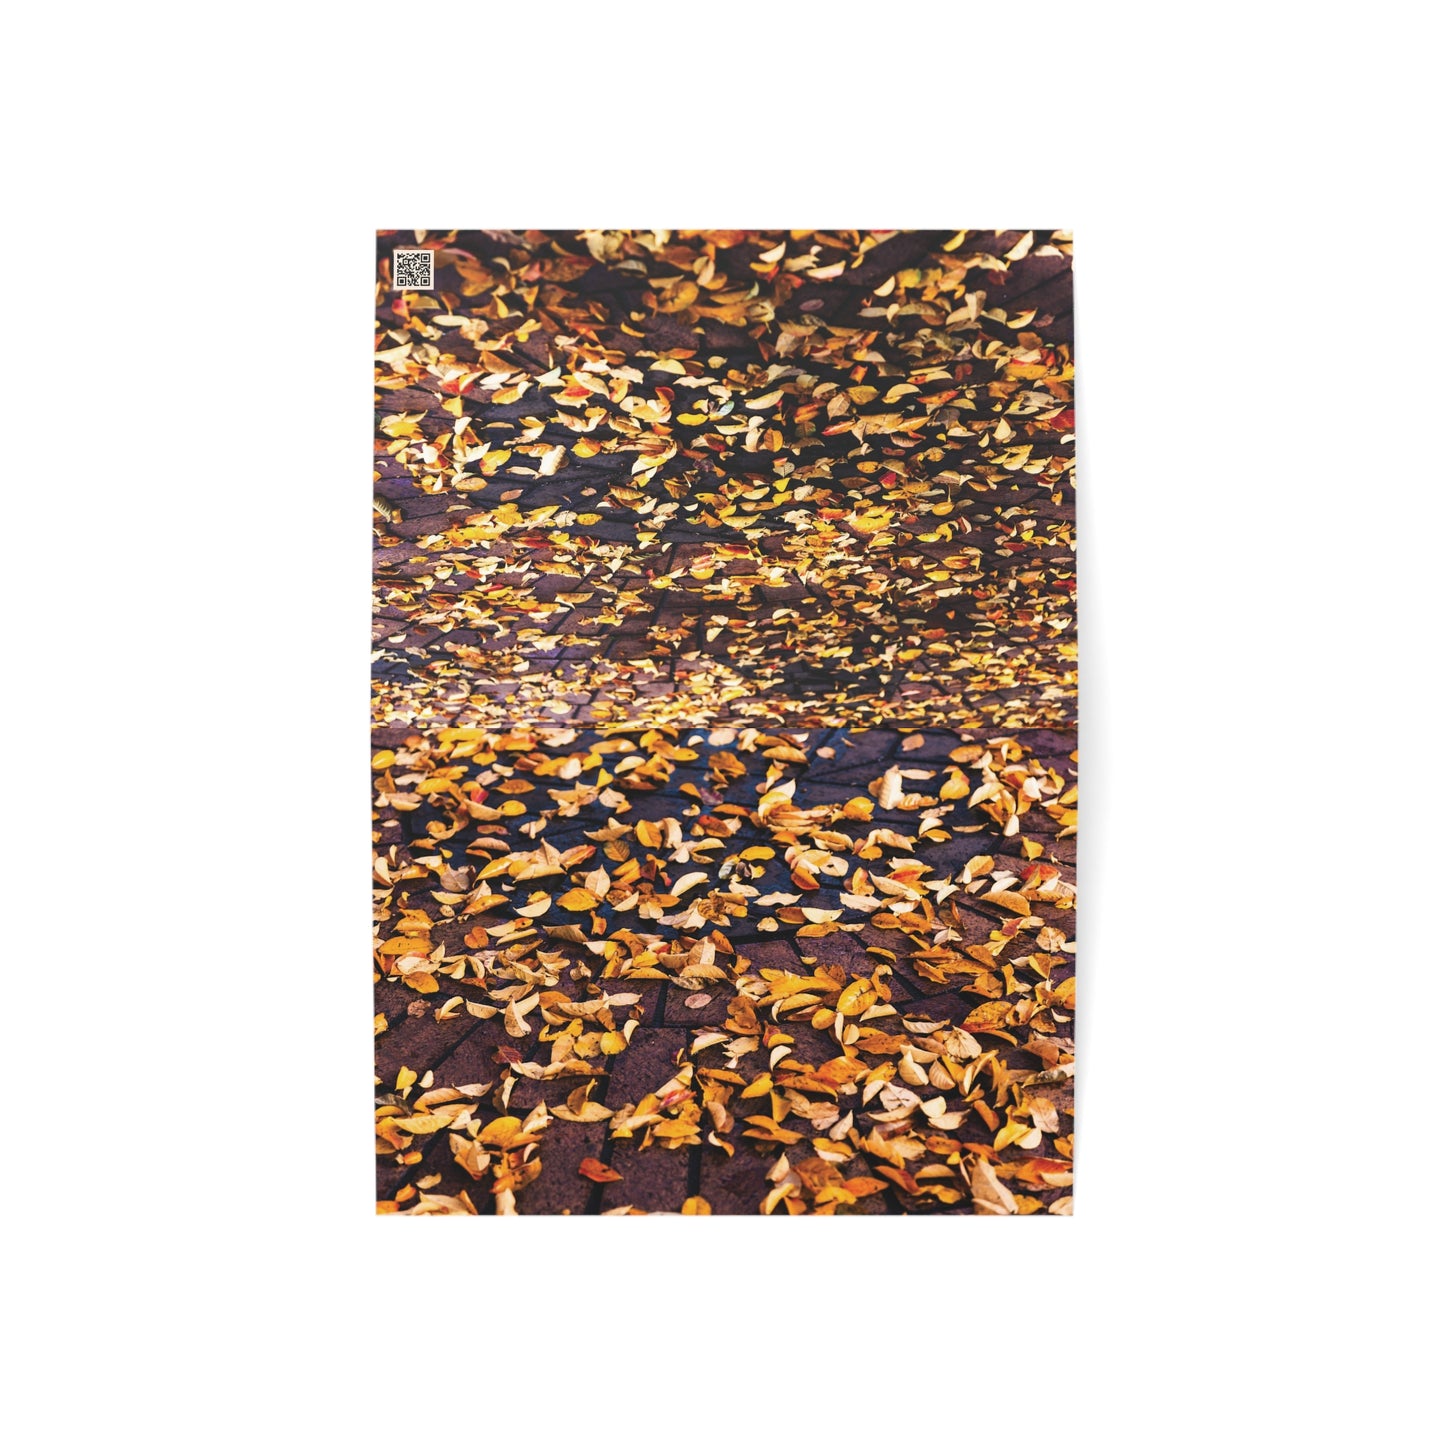 Fall Leaves - Greeting Cards